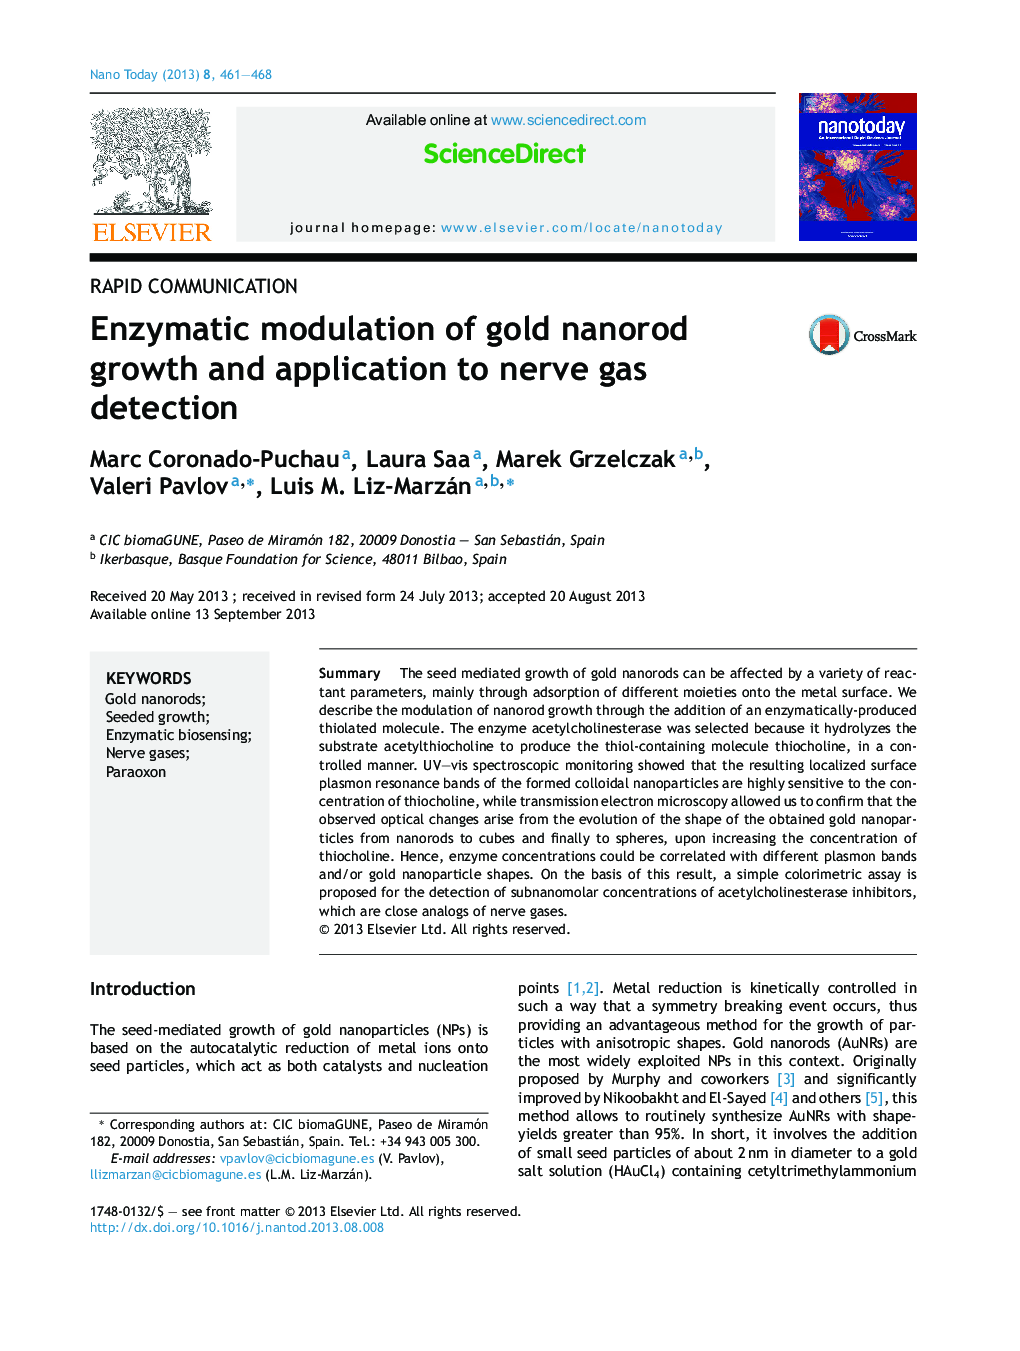 Enzymatic modulation of gold nanorod growth and application to nerve gas detection